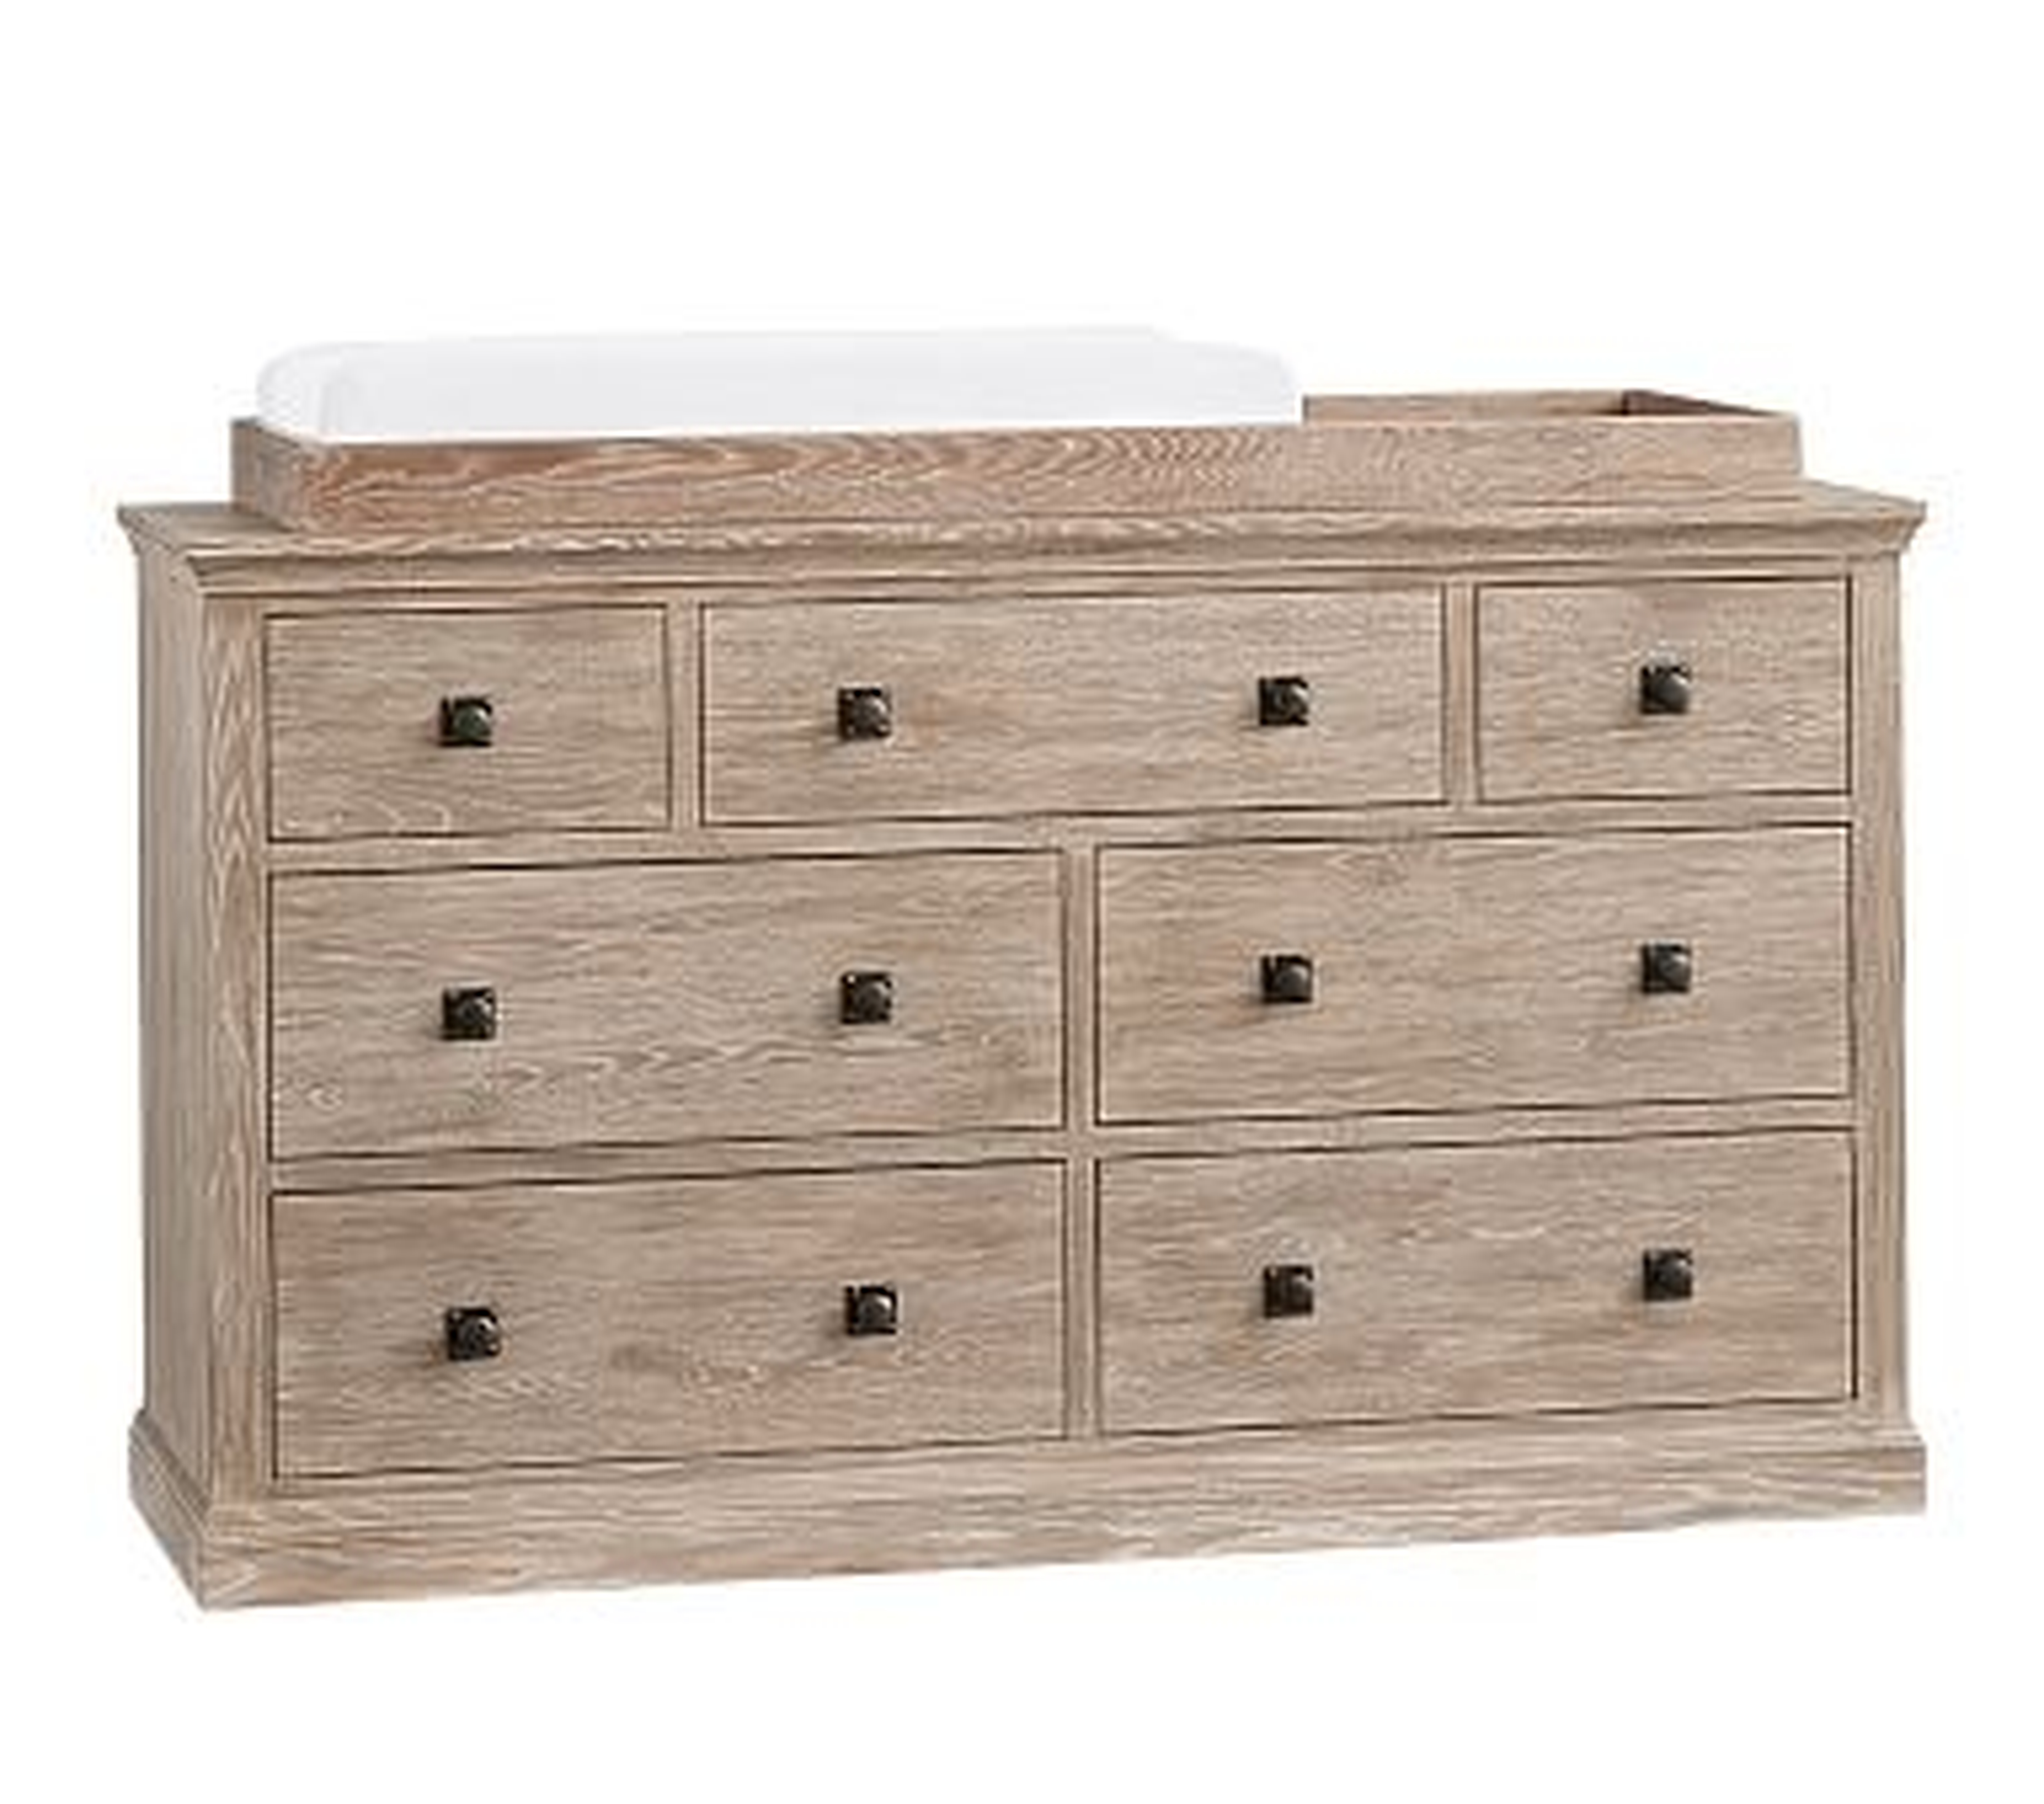 Charlie Extra Wide Dresser & Topper Set, Smoked Gray - Pottery Barn Kids